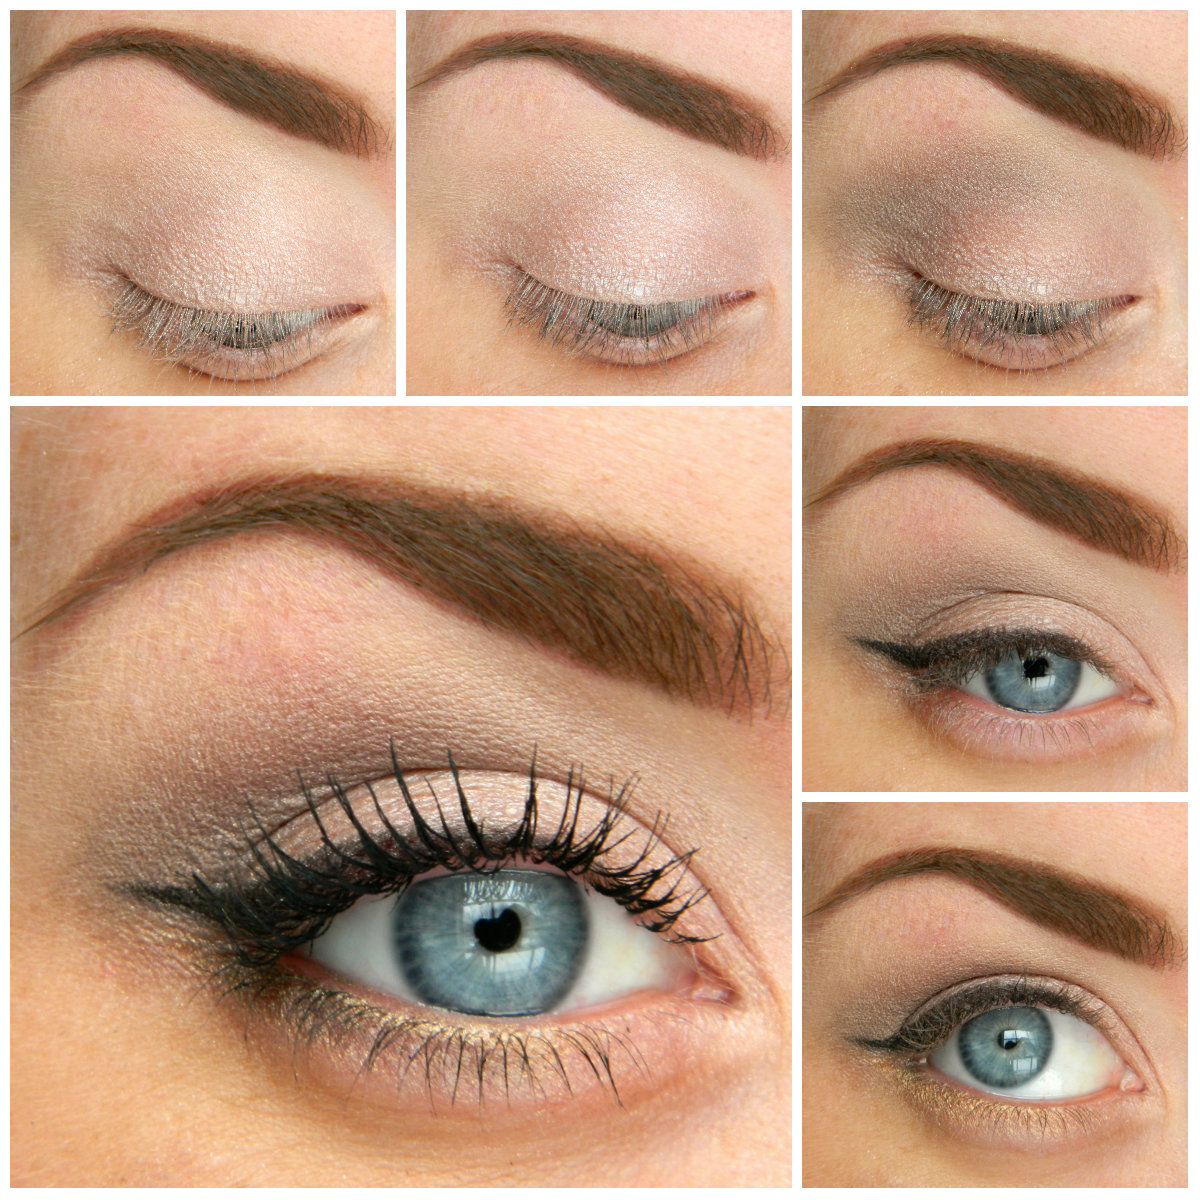 Blue Eye Makeup 5 Ways To Make Blue Eyes Pop With Proper Eye Makeup Her Style Code